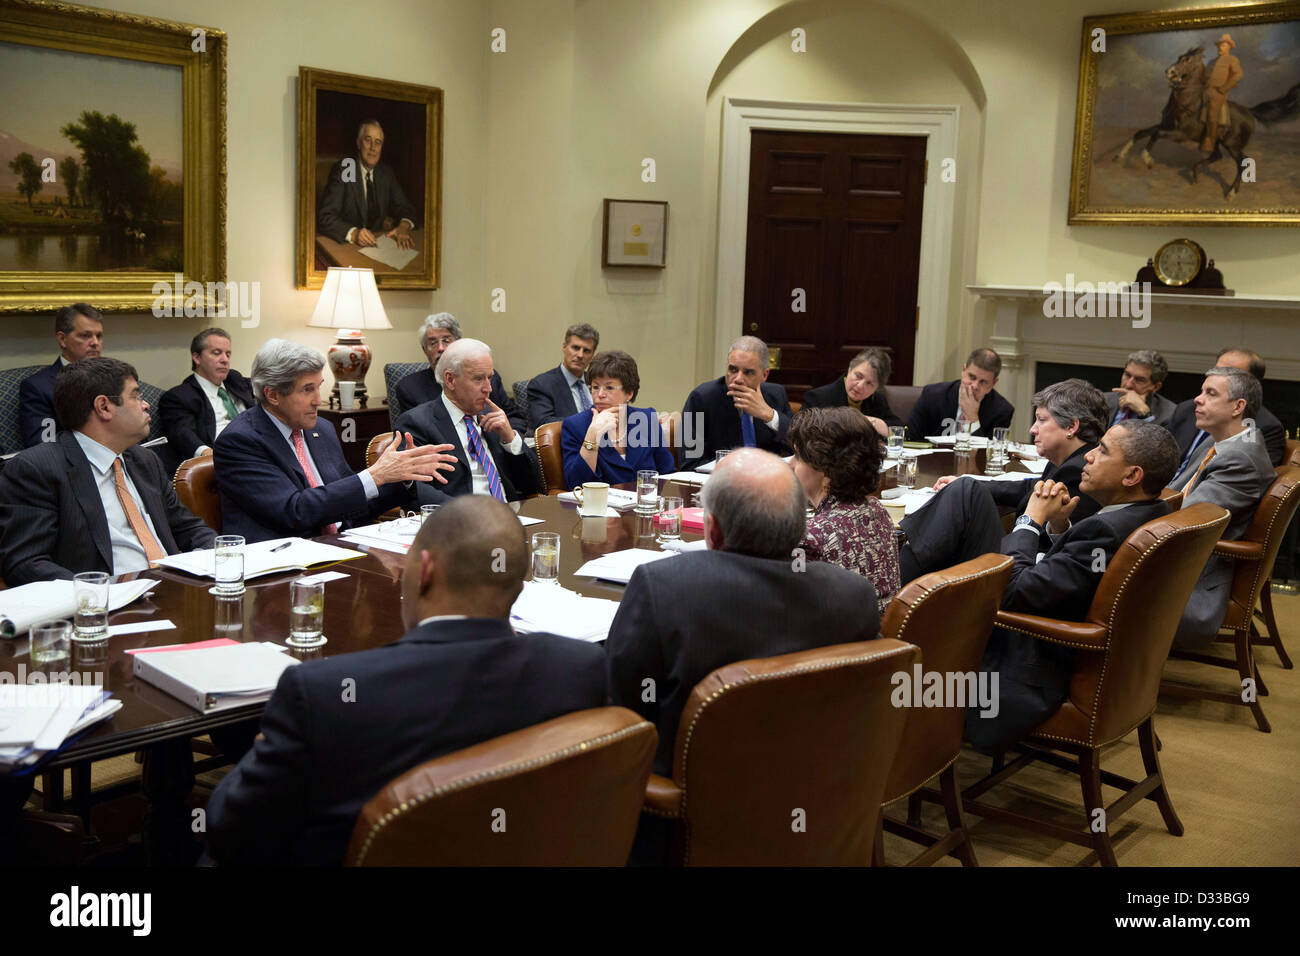 US President Barack Obama listens to Secretary of State John Kerry during a meeting on immigration with Cabinet members and advisors in the Roosevelt Room of the White House February 7, 2013 in Washington, DC. Stock Photo